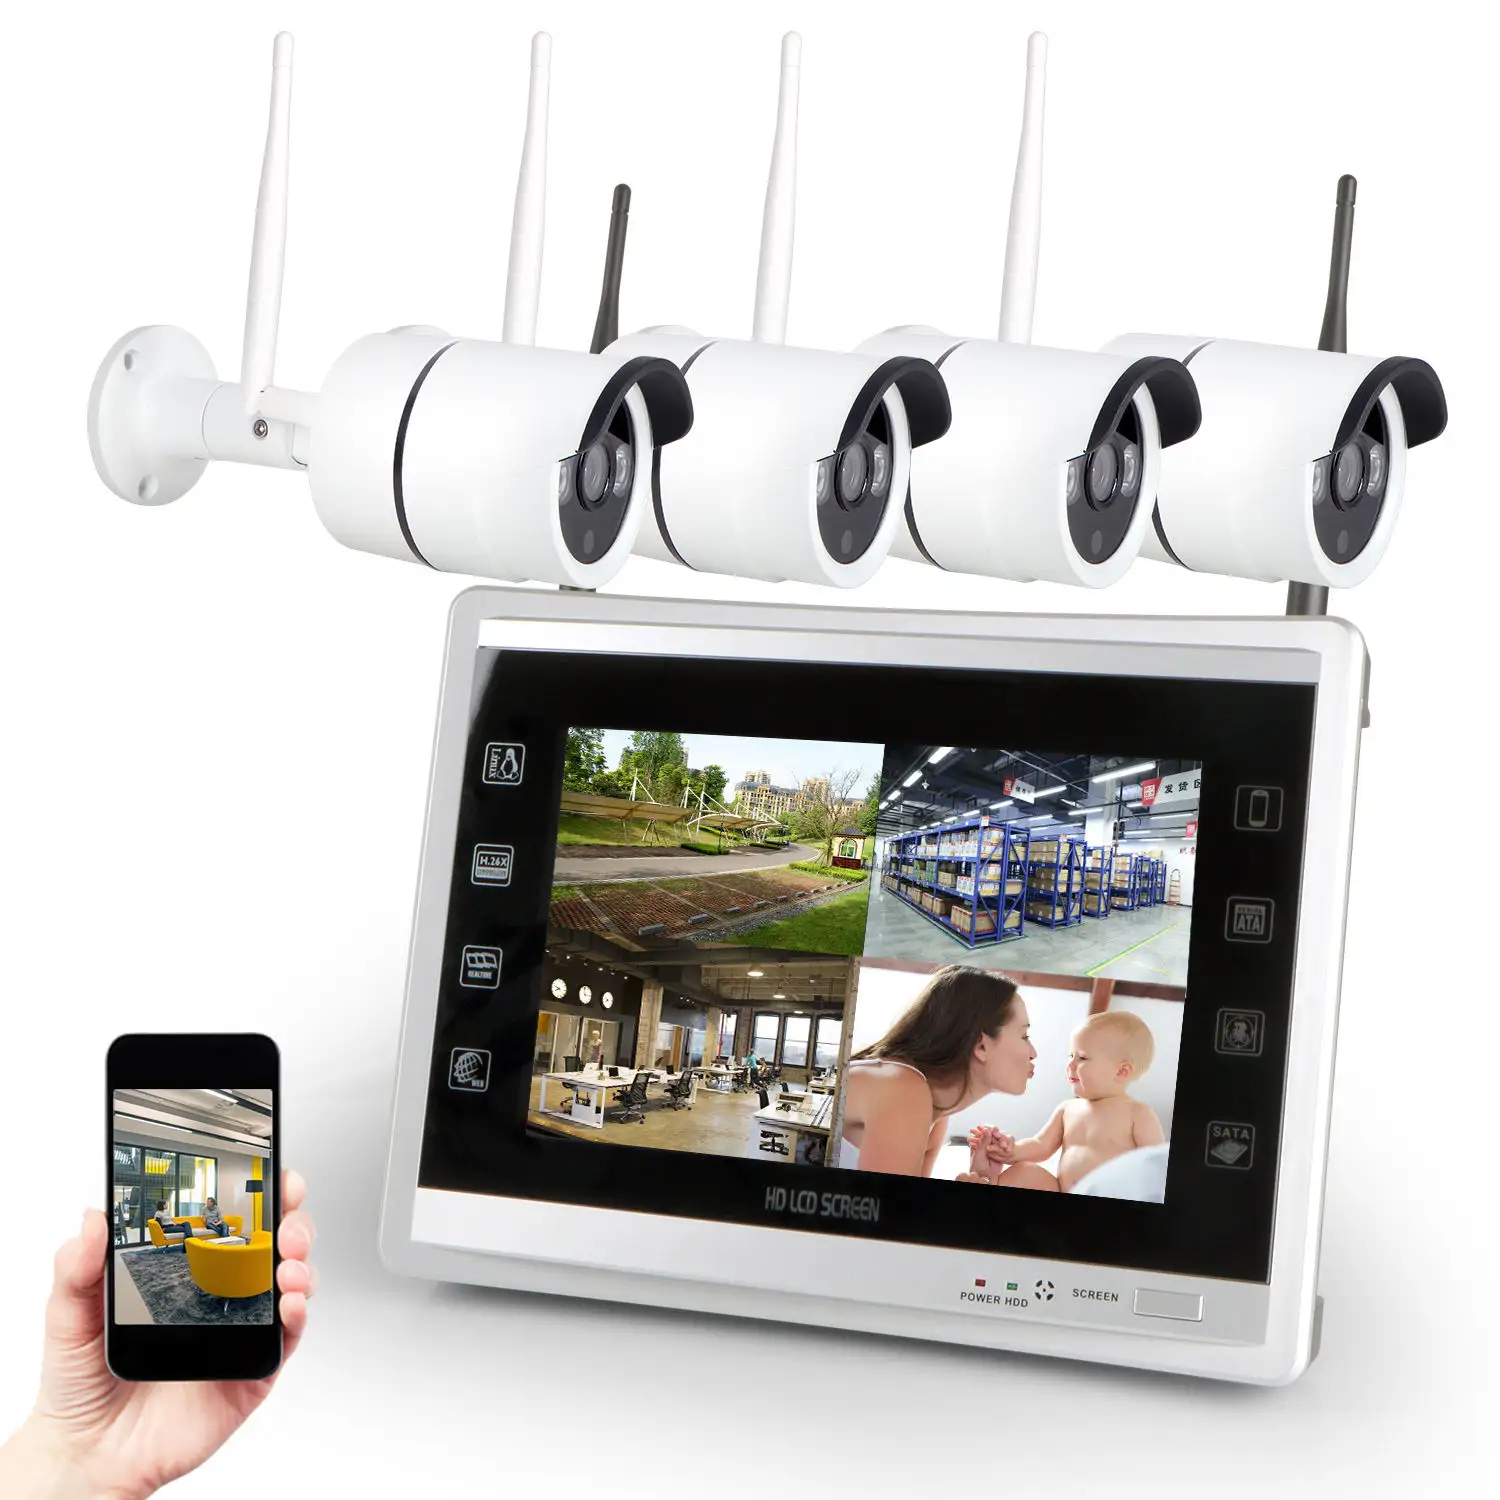 CCTV 4CH 1080P HD WIFI Camera System Integrated Wireless NVR Kit with 11 Inch LCD Monitor